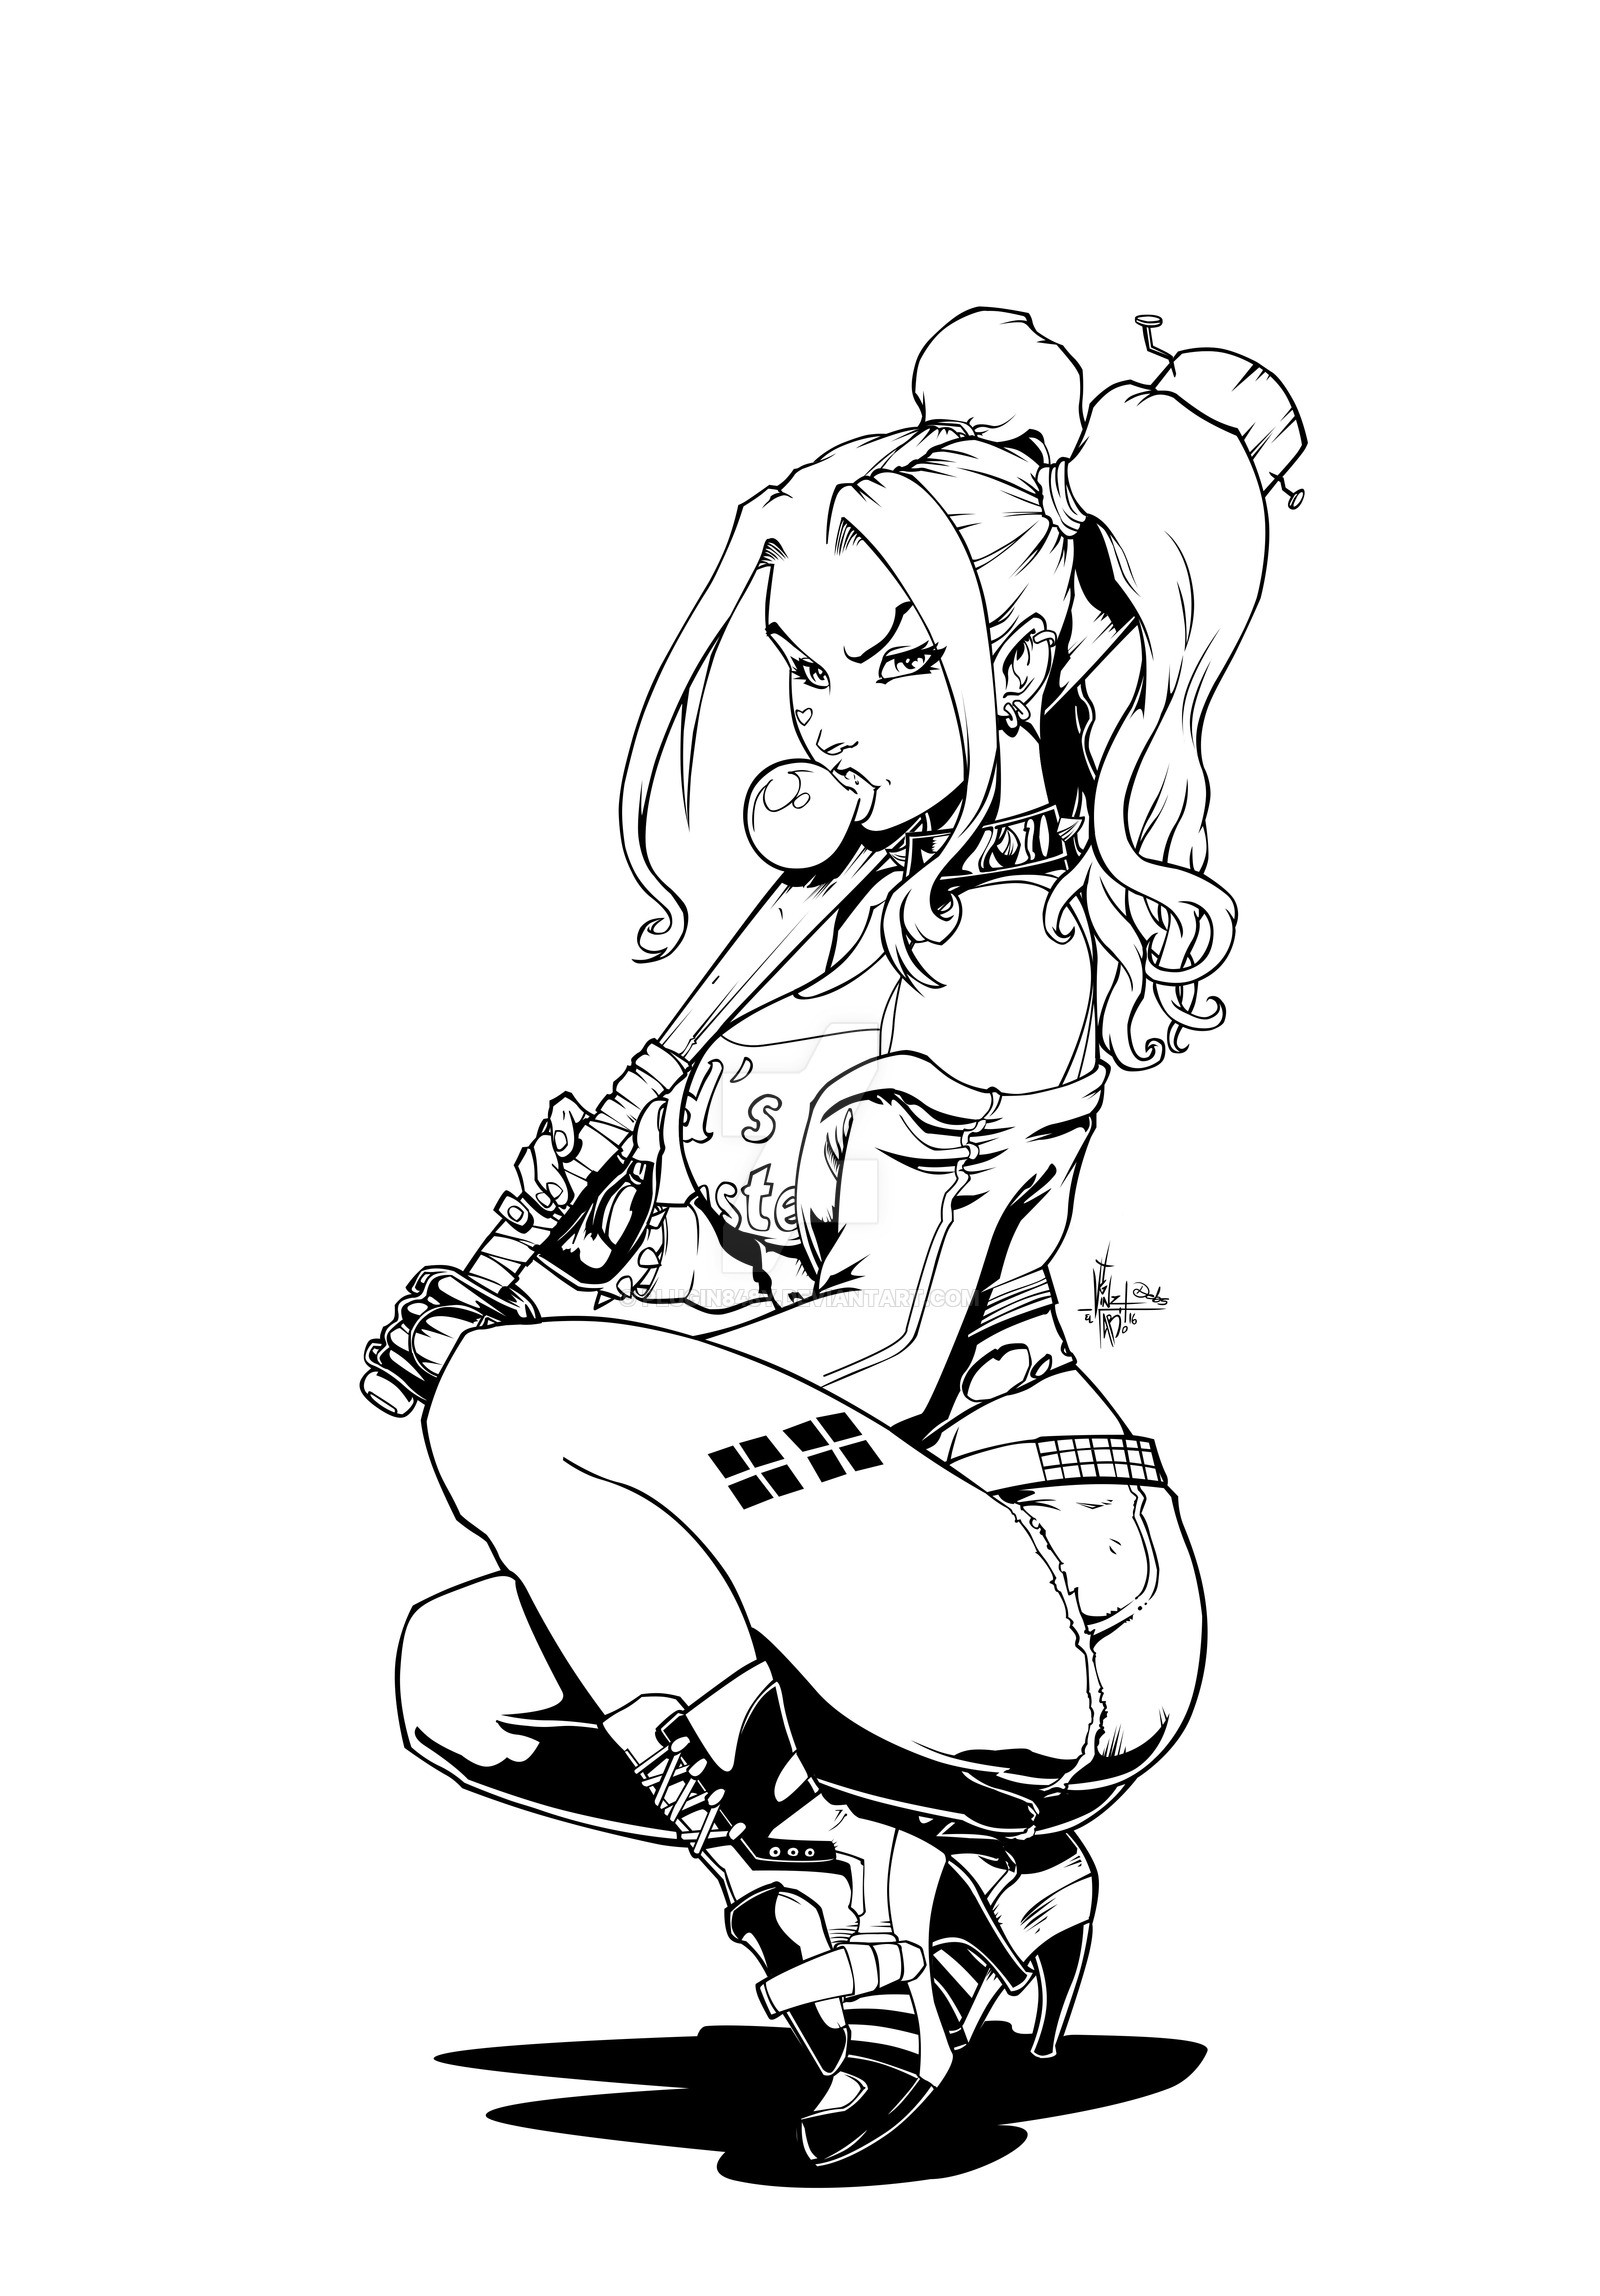 Harley Quinn Coloring Pages For Kids
 Suicide Squad Coloring Pages Best Coloring Pages For Kids